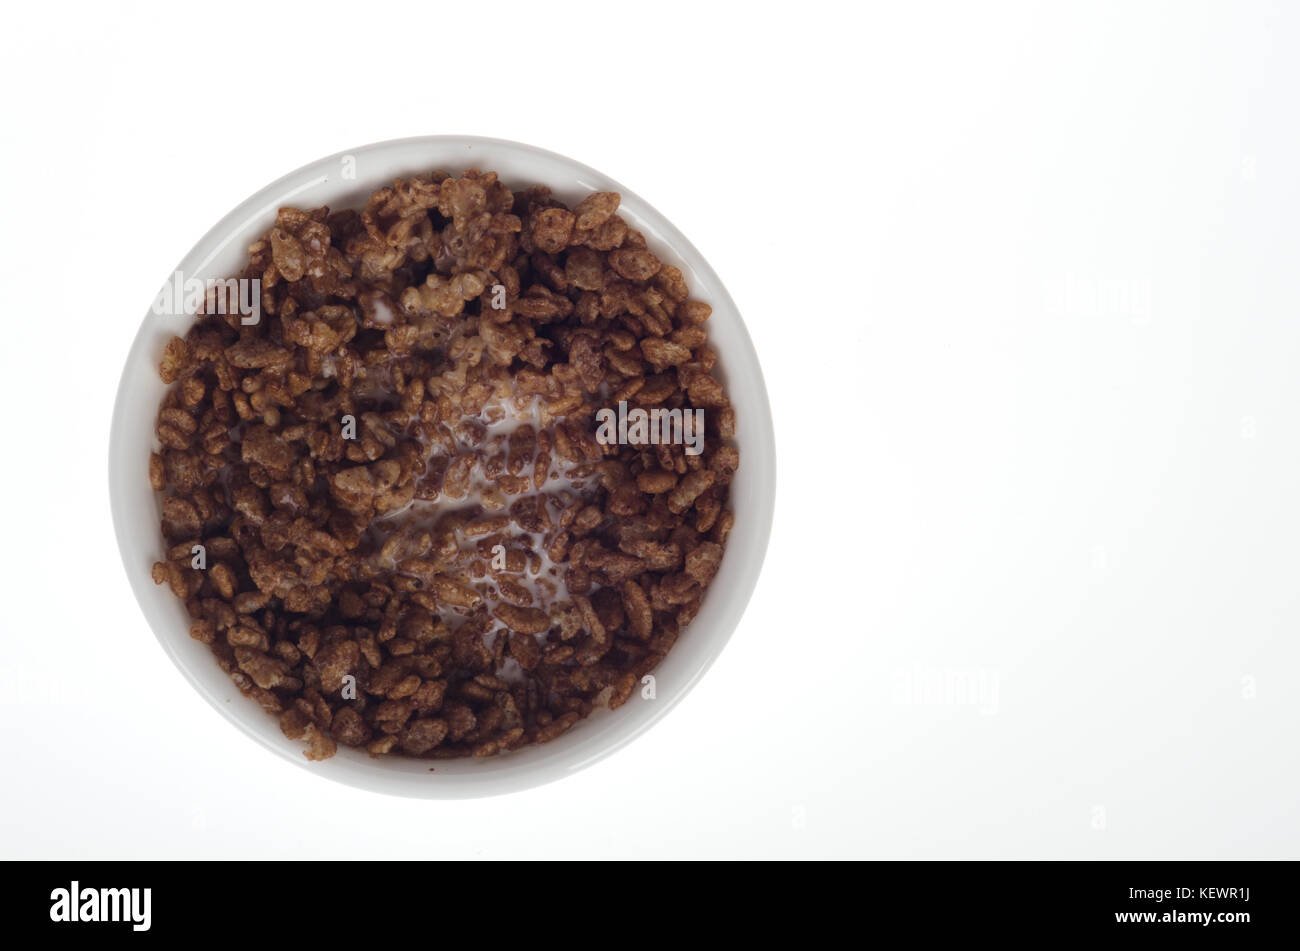 Bowl of Kellogg's Cocoa Krispies breakfast cereal with milk from above USA Stock Photo